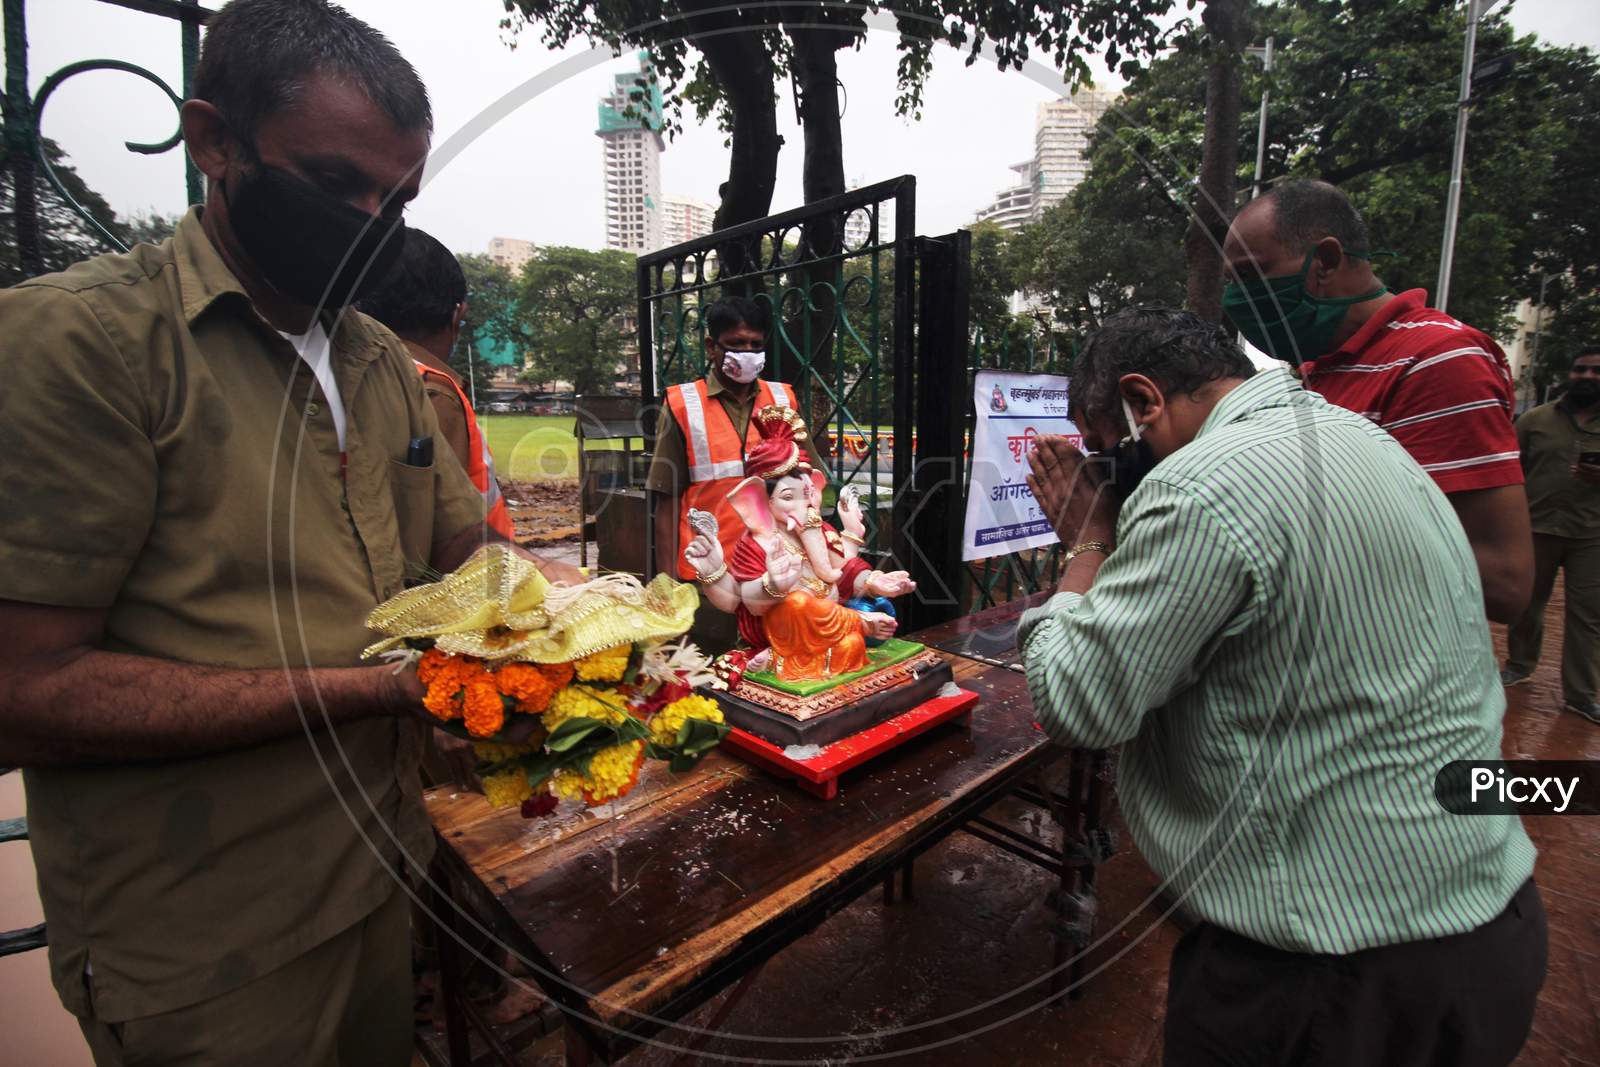 Devotees pray to a clay idol of Hindu elephant-headed deity Ganesh, before immersing it in an artificial pond, in Mumbai, India on August 23, 2020.